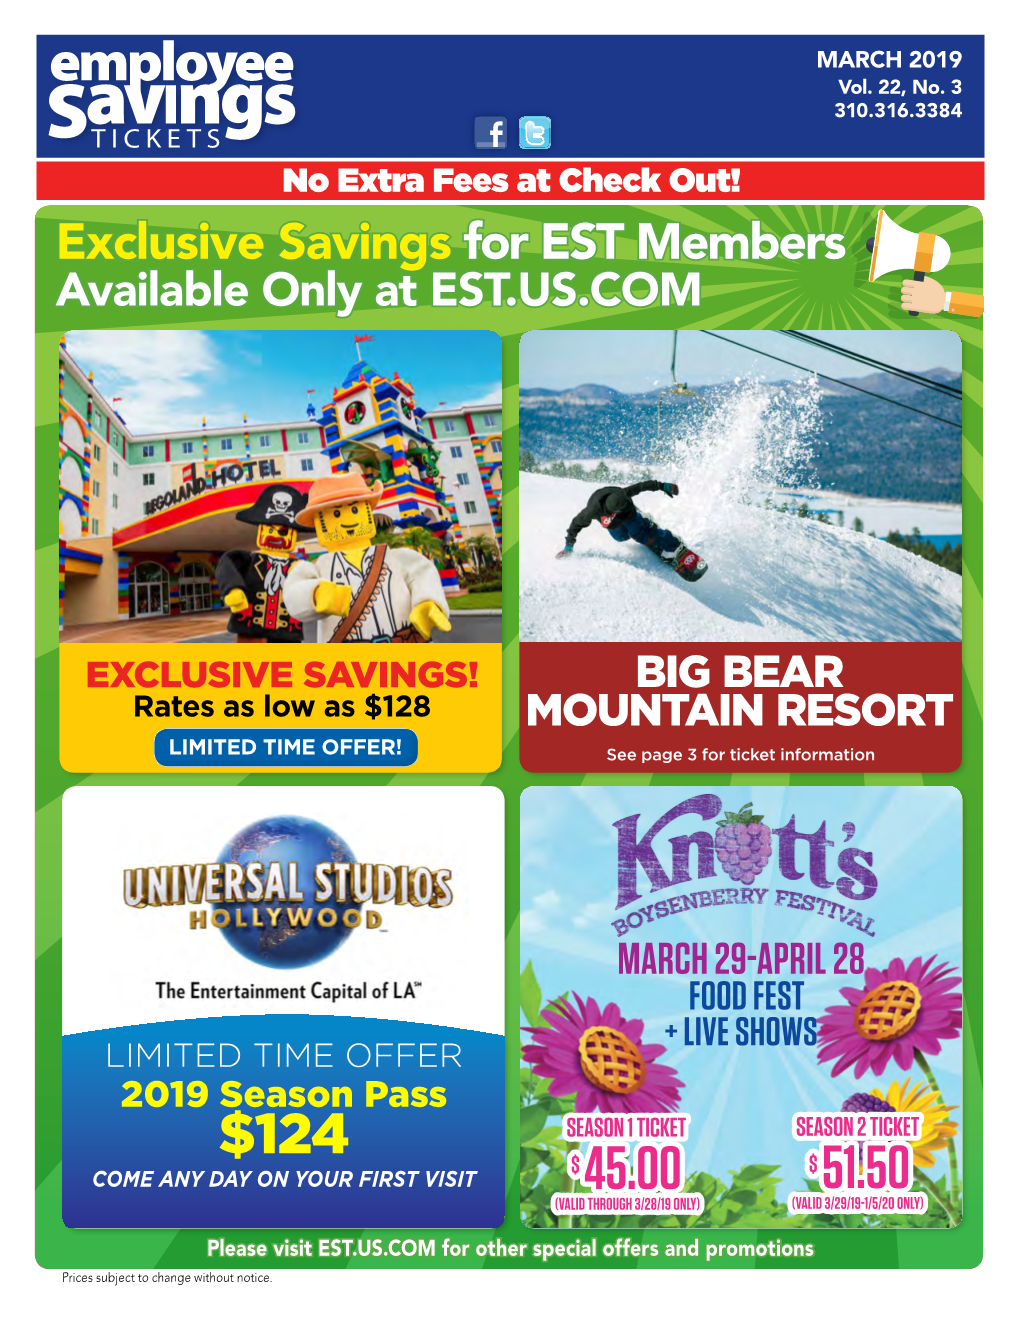 Season 2 Ticket $ $ Come Any Day on Your First Visit 45.00 51.50 (Valid Through 3/28/19 Only) (Valid 3/29/19-1/5/20 Only)